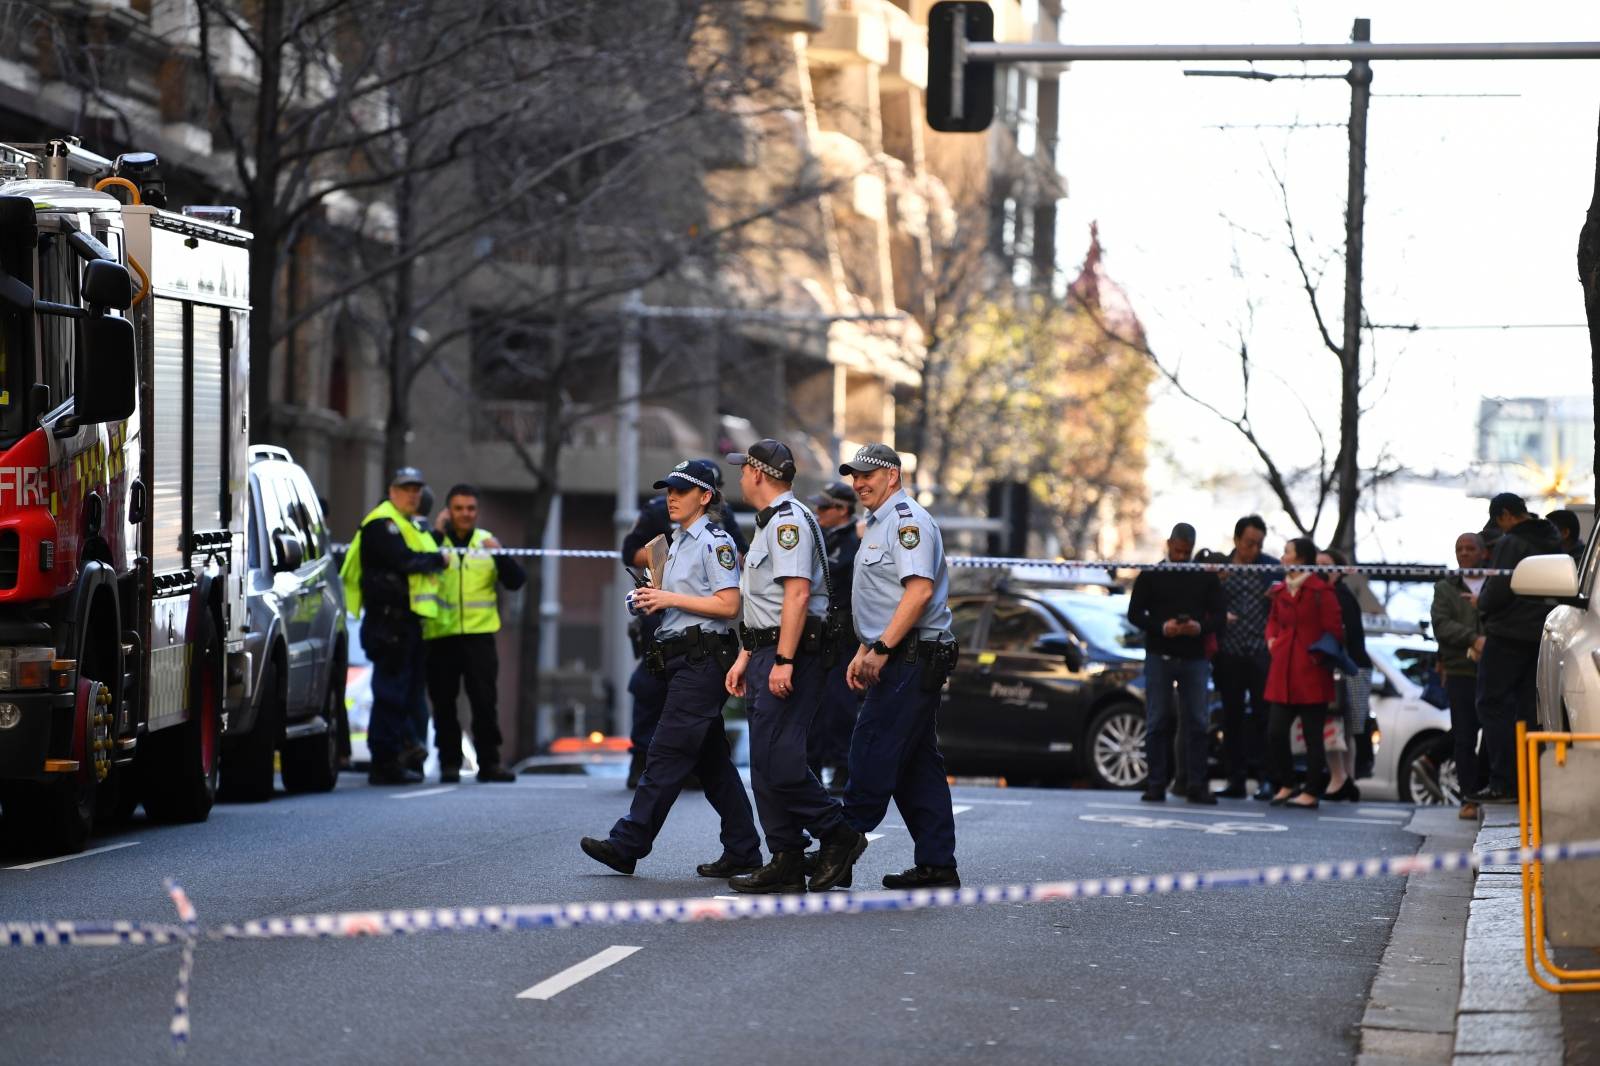 Police officers investigate a scene following reports of a stabbing in Sydney